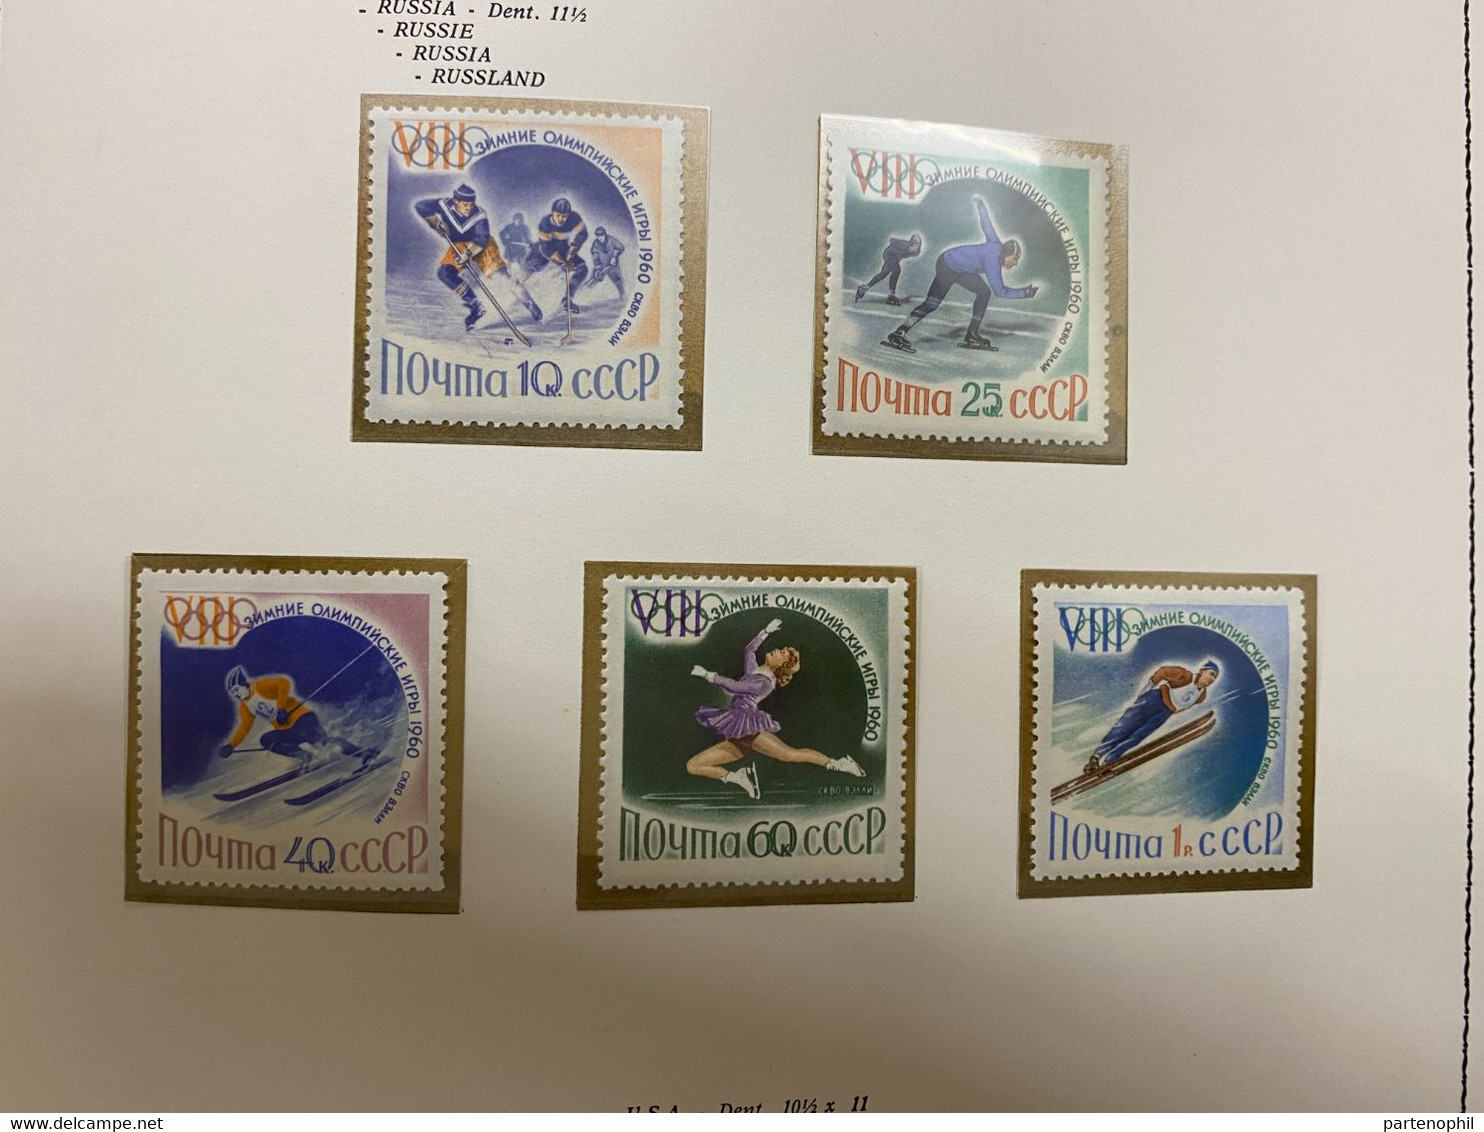 Russia - Squaw Valley 1960 - Winter Olimpic Games / Sports / Giochi Olimpici - Set MNH - Winter 1960: Squaw Valley